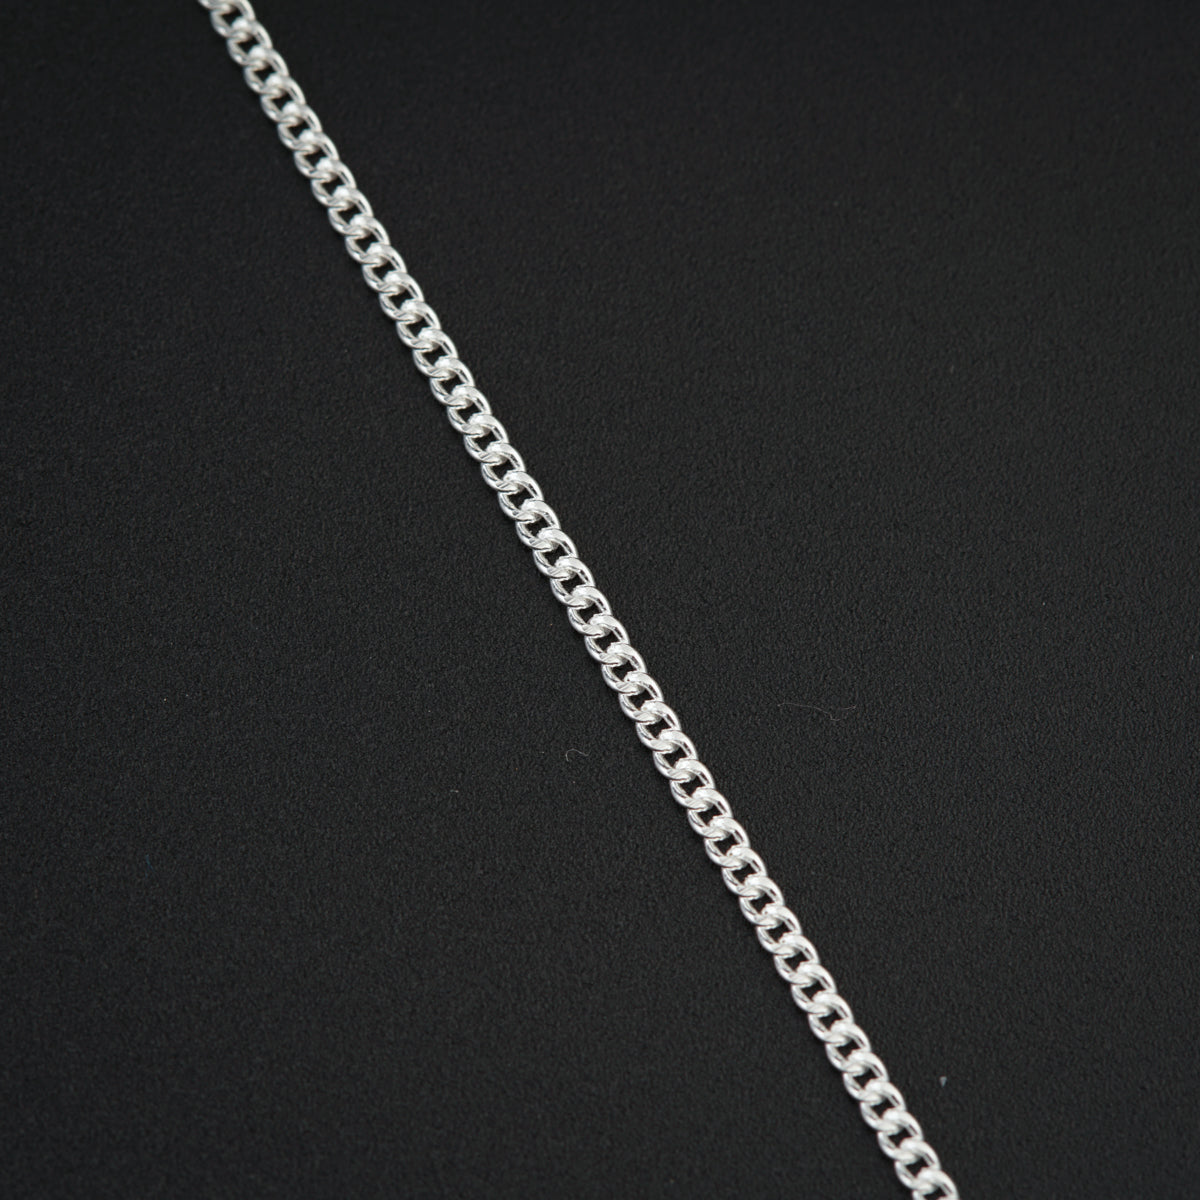 a silver chain on a black background